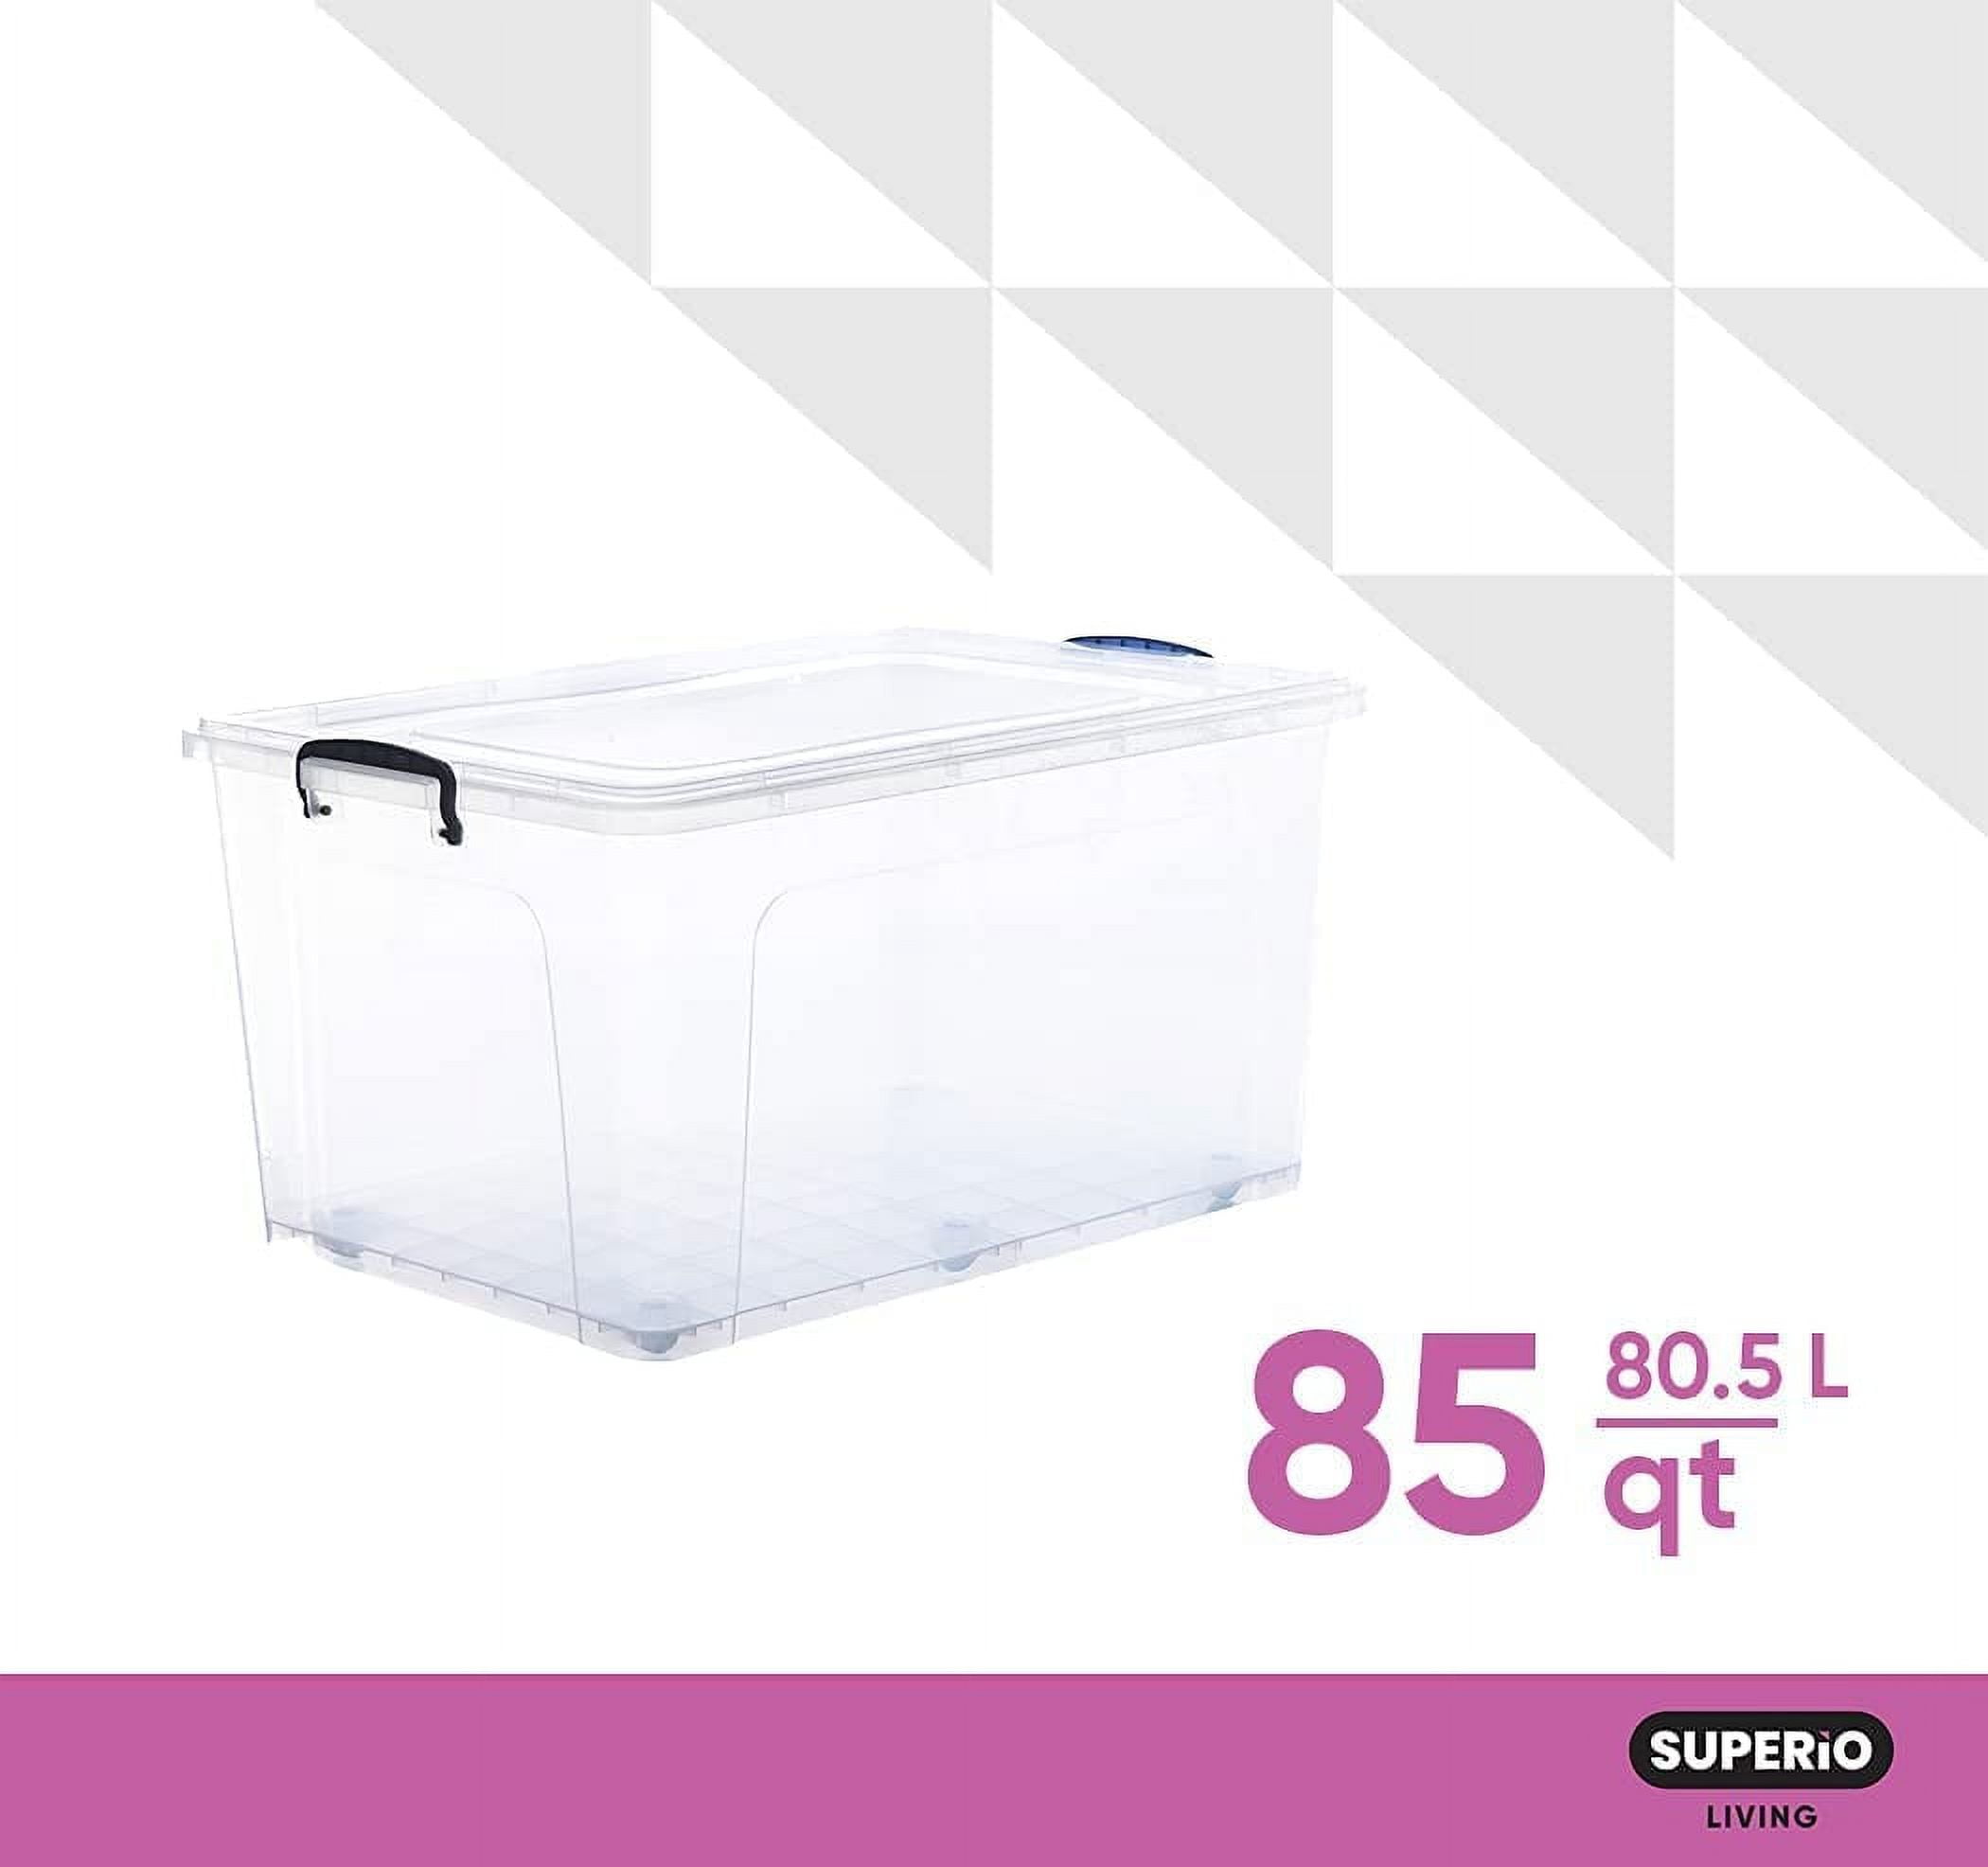 Superio Storage Containers With Wheels (6 Pack), Opaque Clear